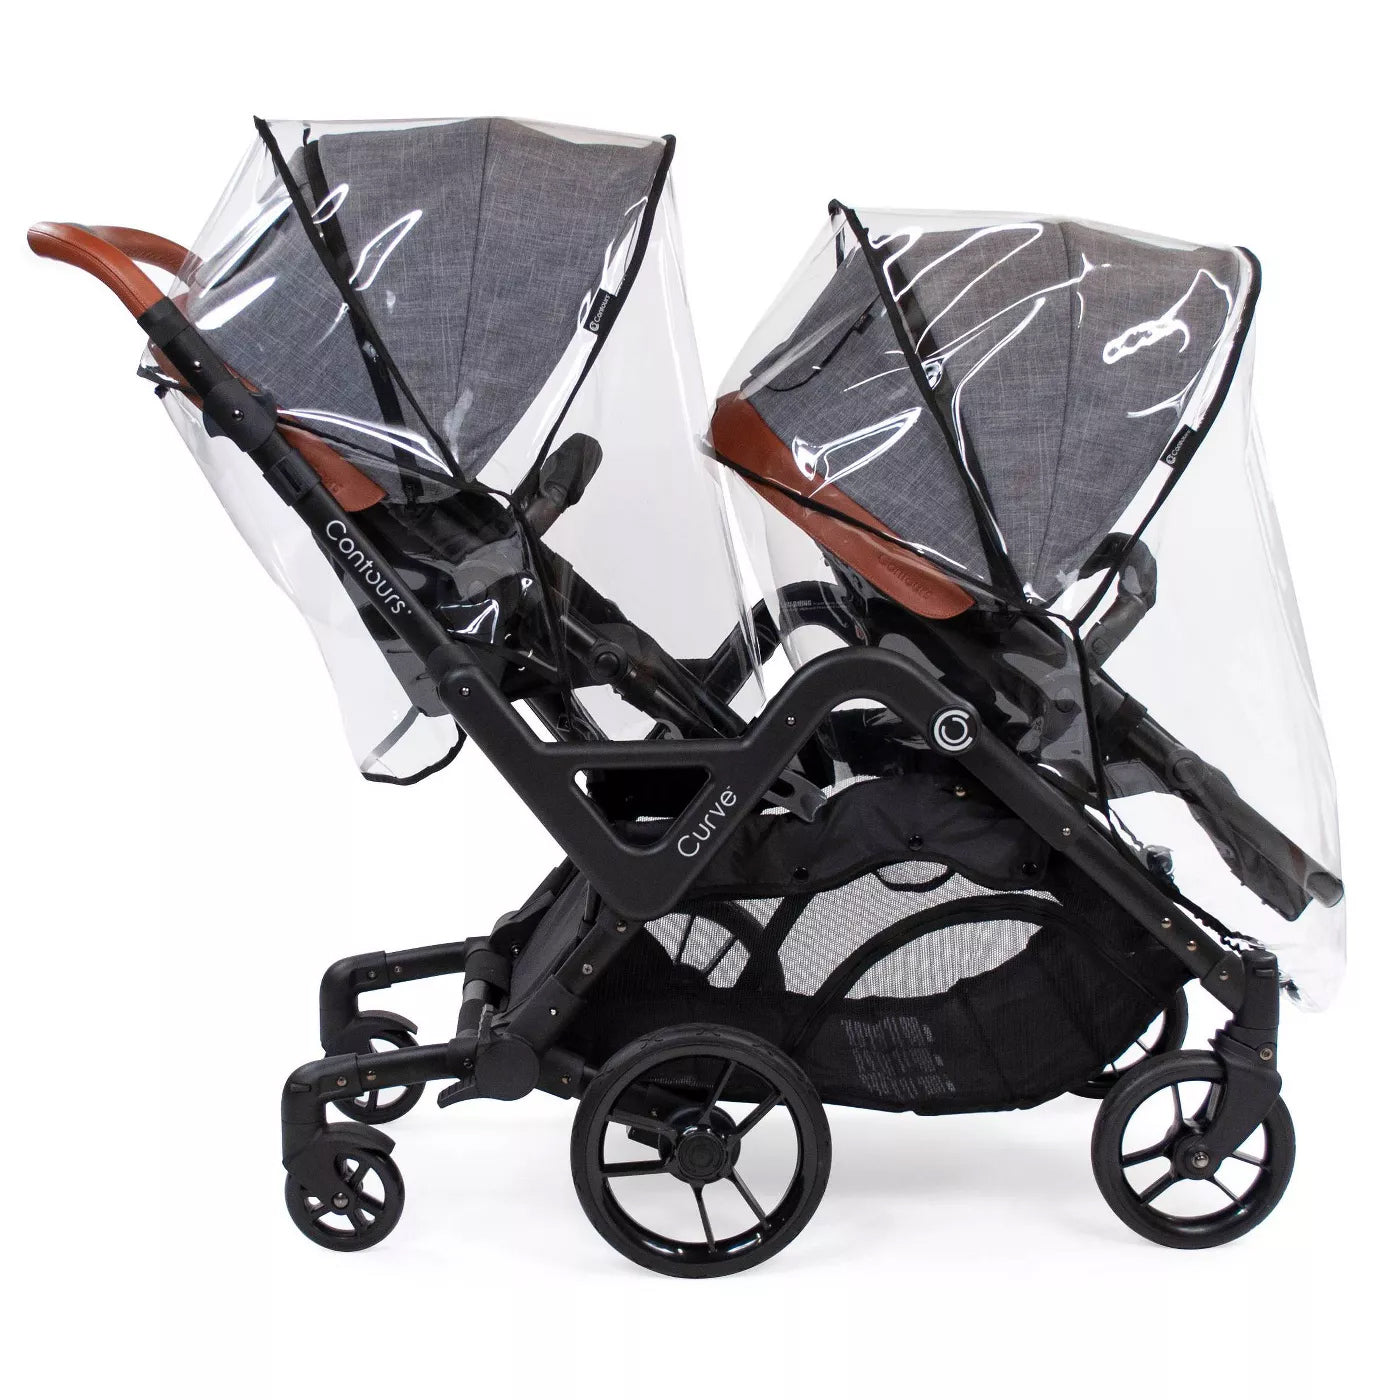 Contours Weather Shield Accessory for Contours Single & Double Strollers, Clear Black Trim